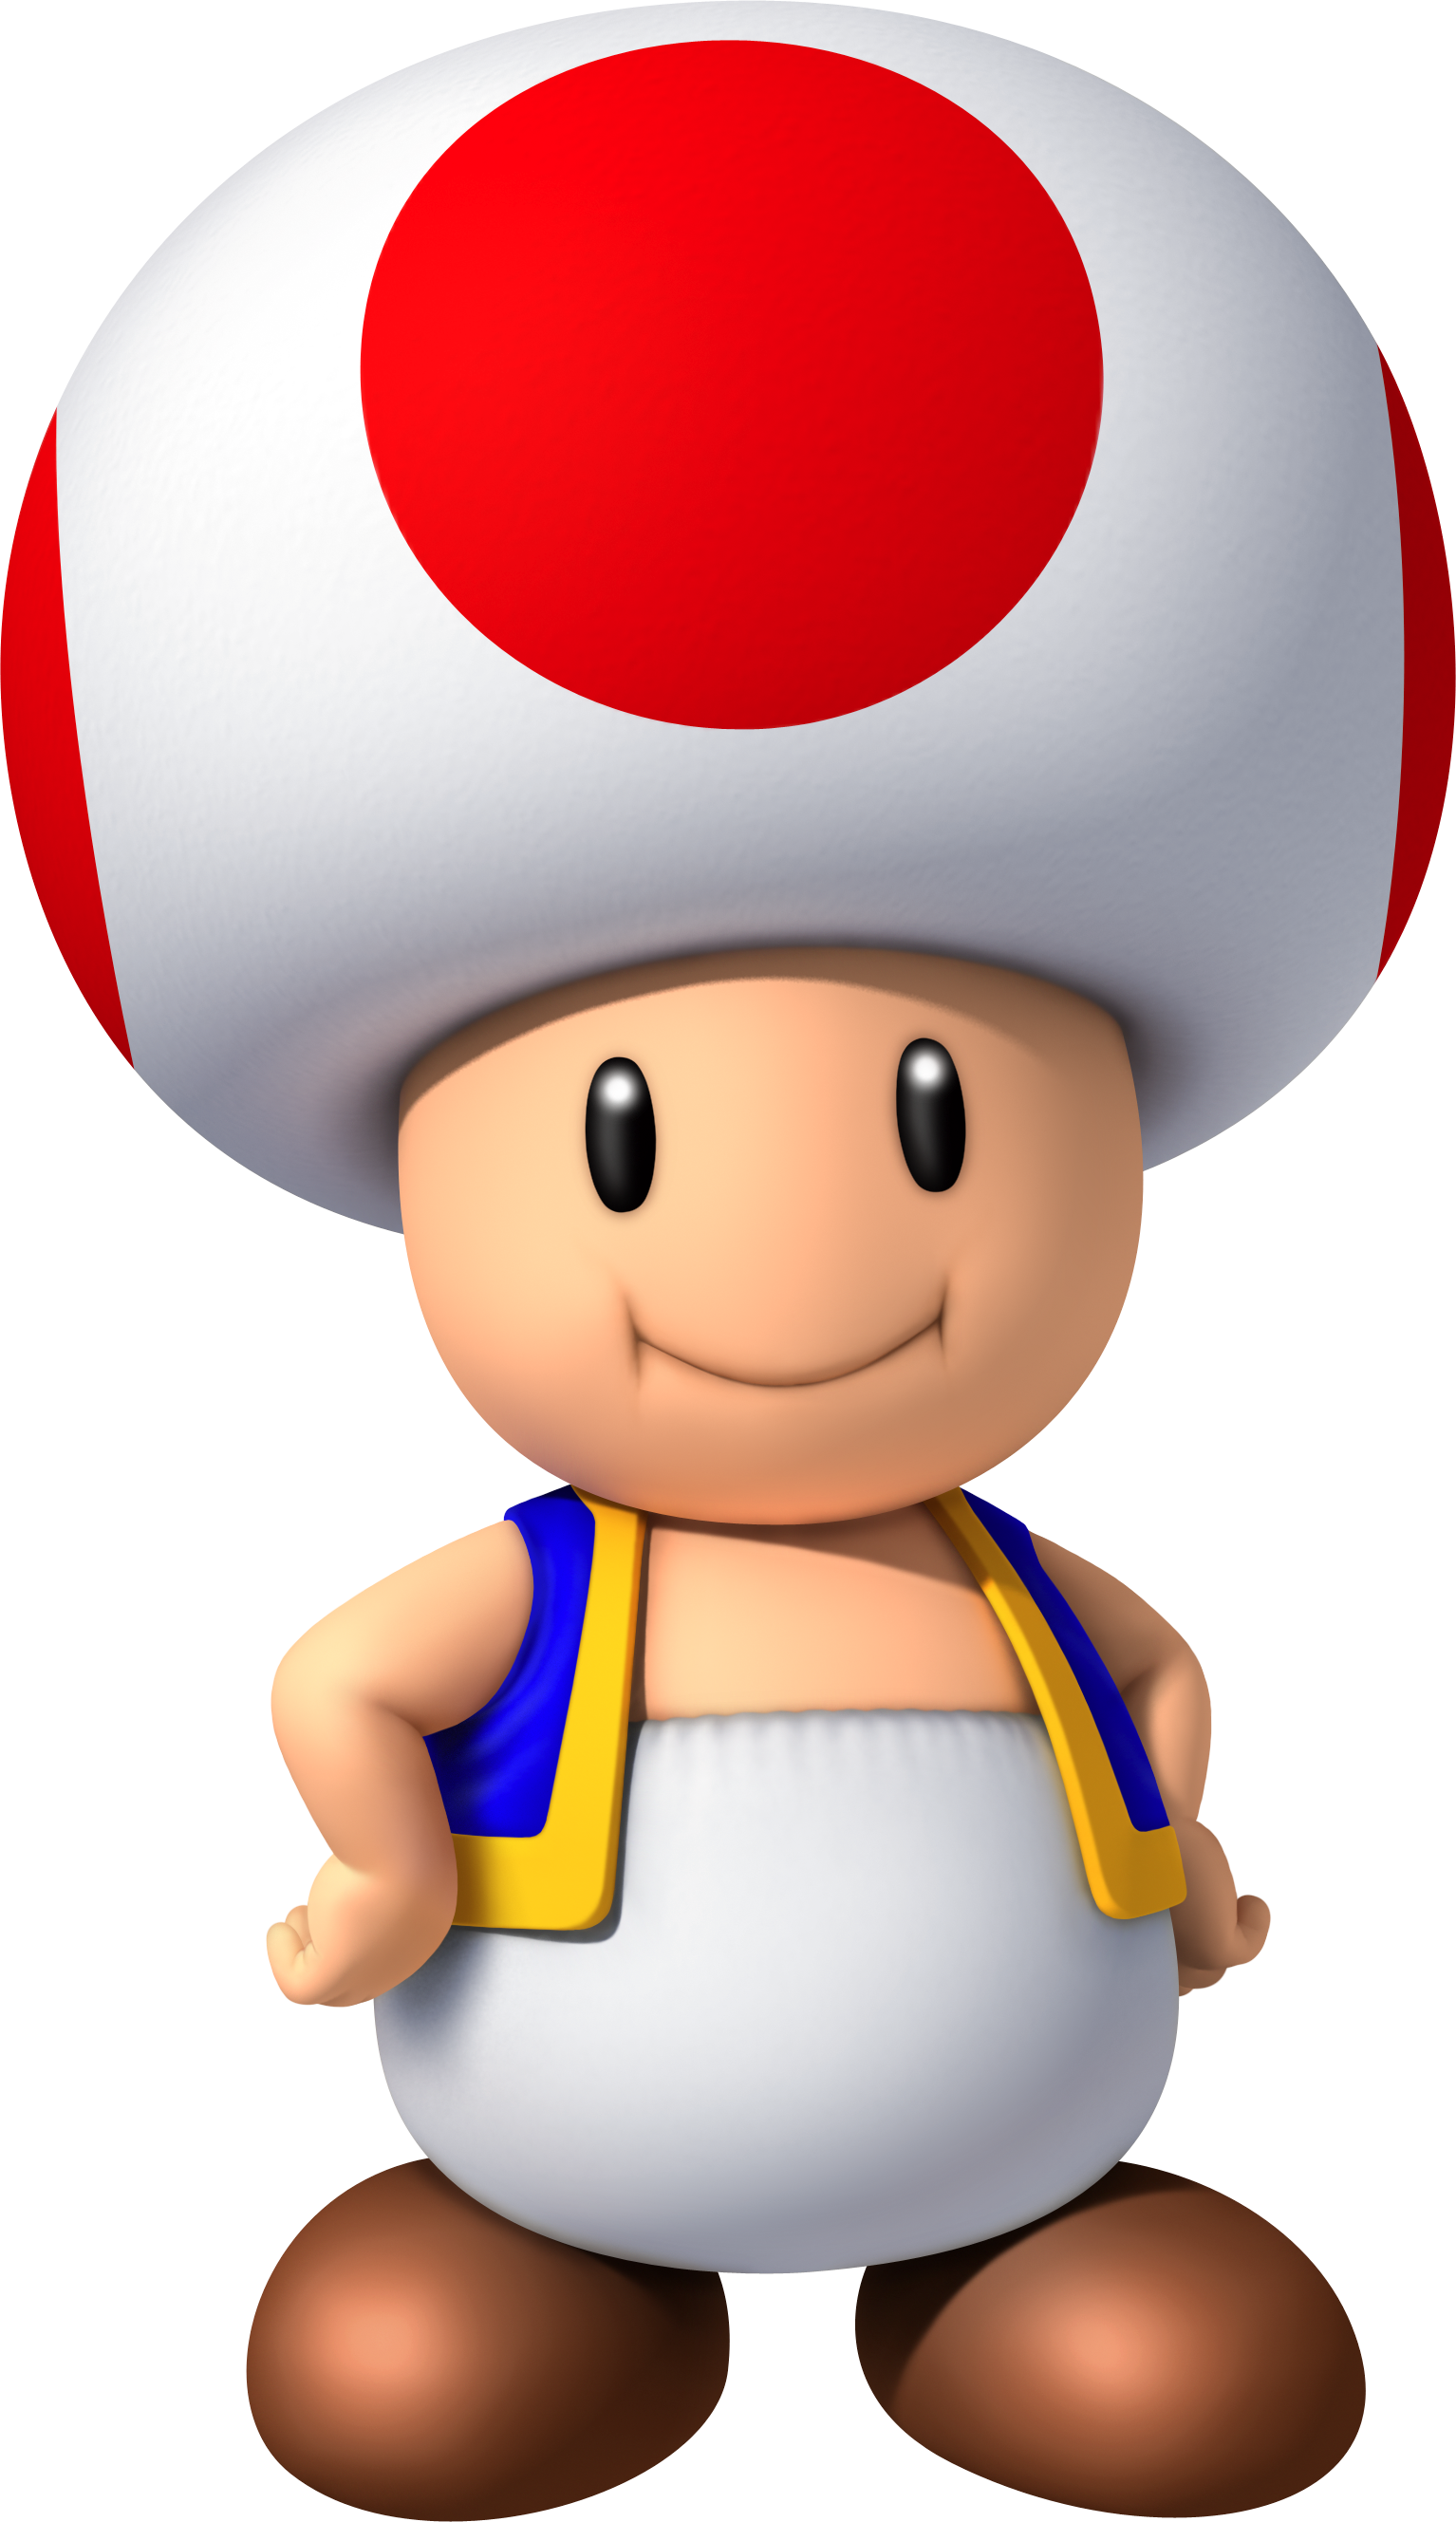 Toad Charakter Mariowiki Fandom Powered By Wikia 